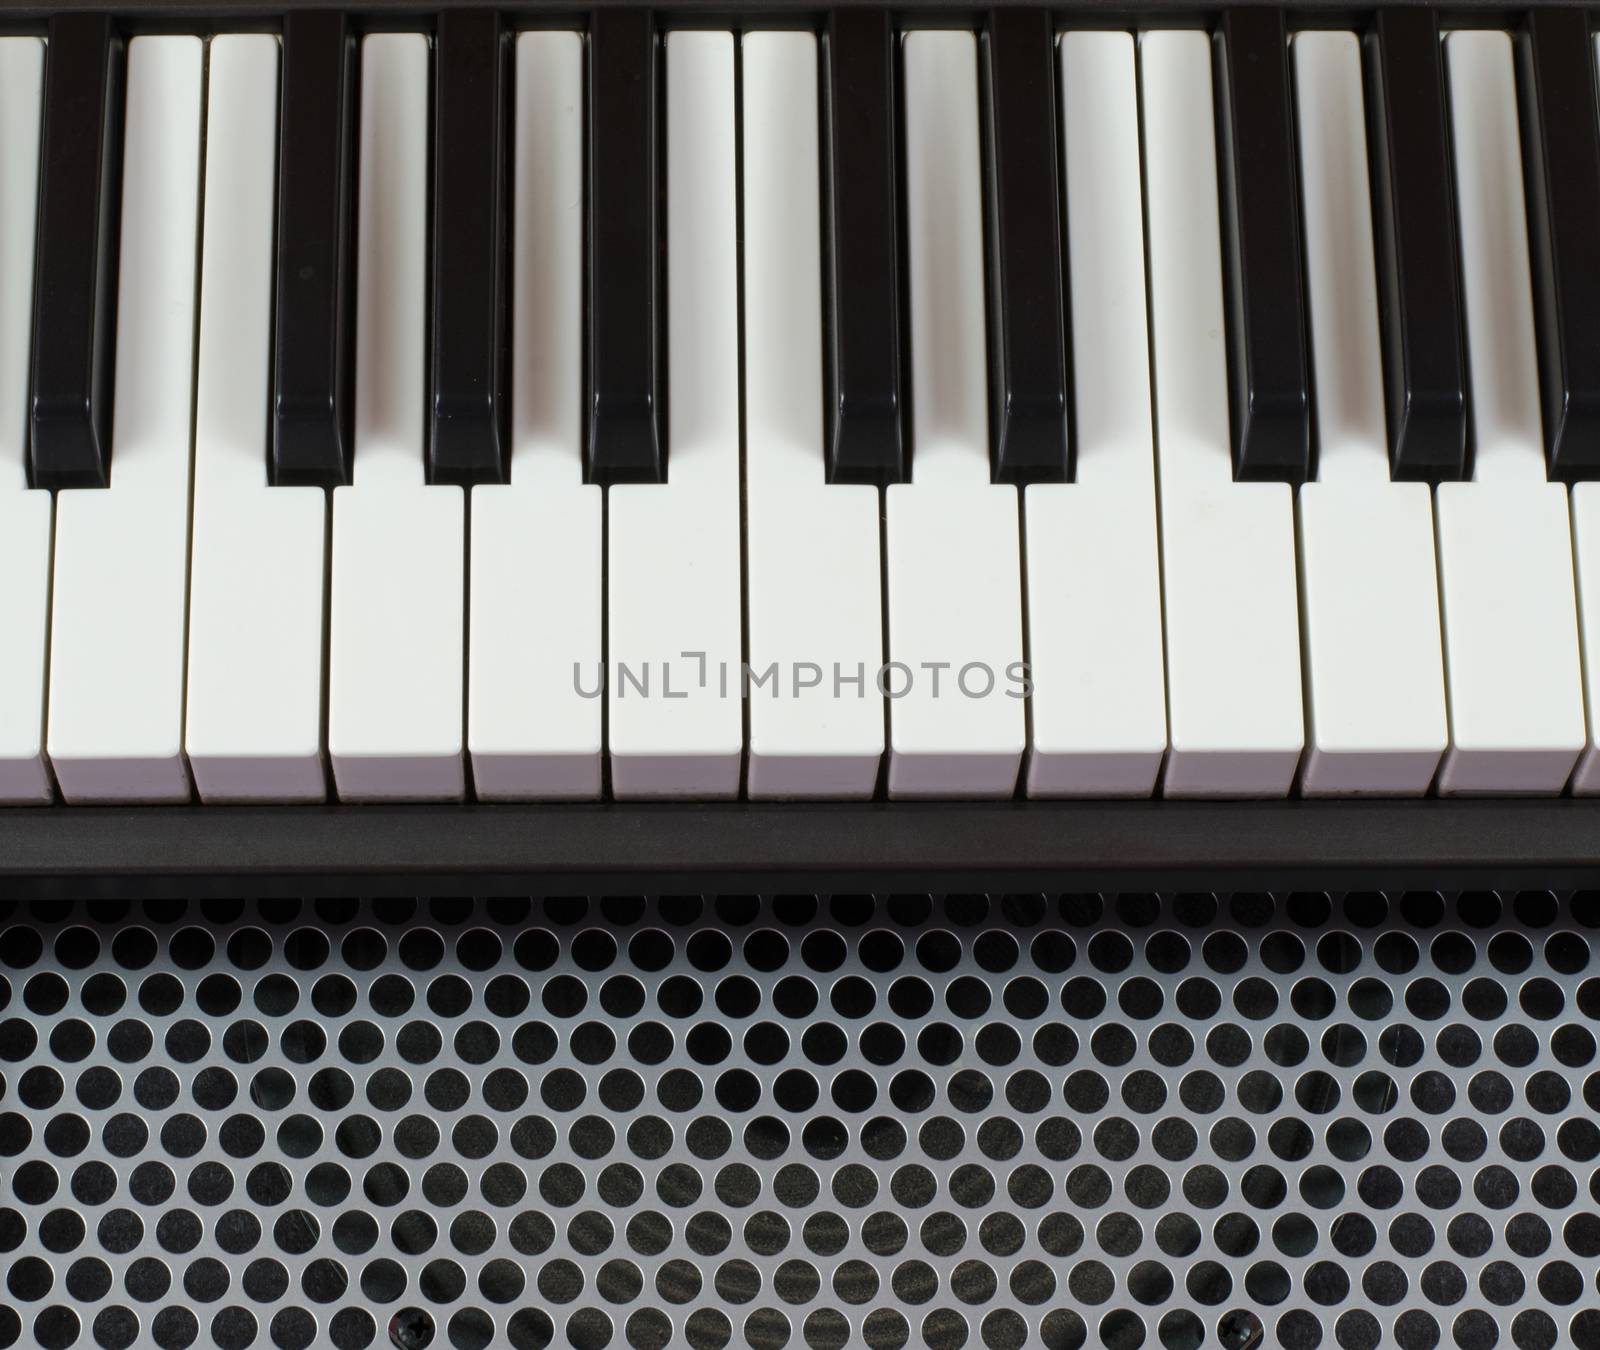 Synthesizer keyboard music instrument, studio shot at interesting perspective on Metal surface